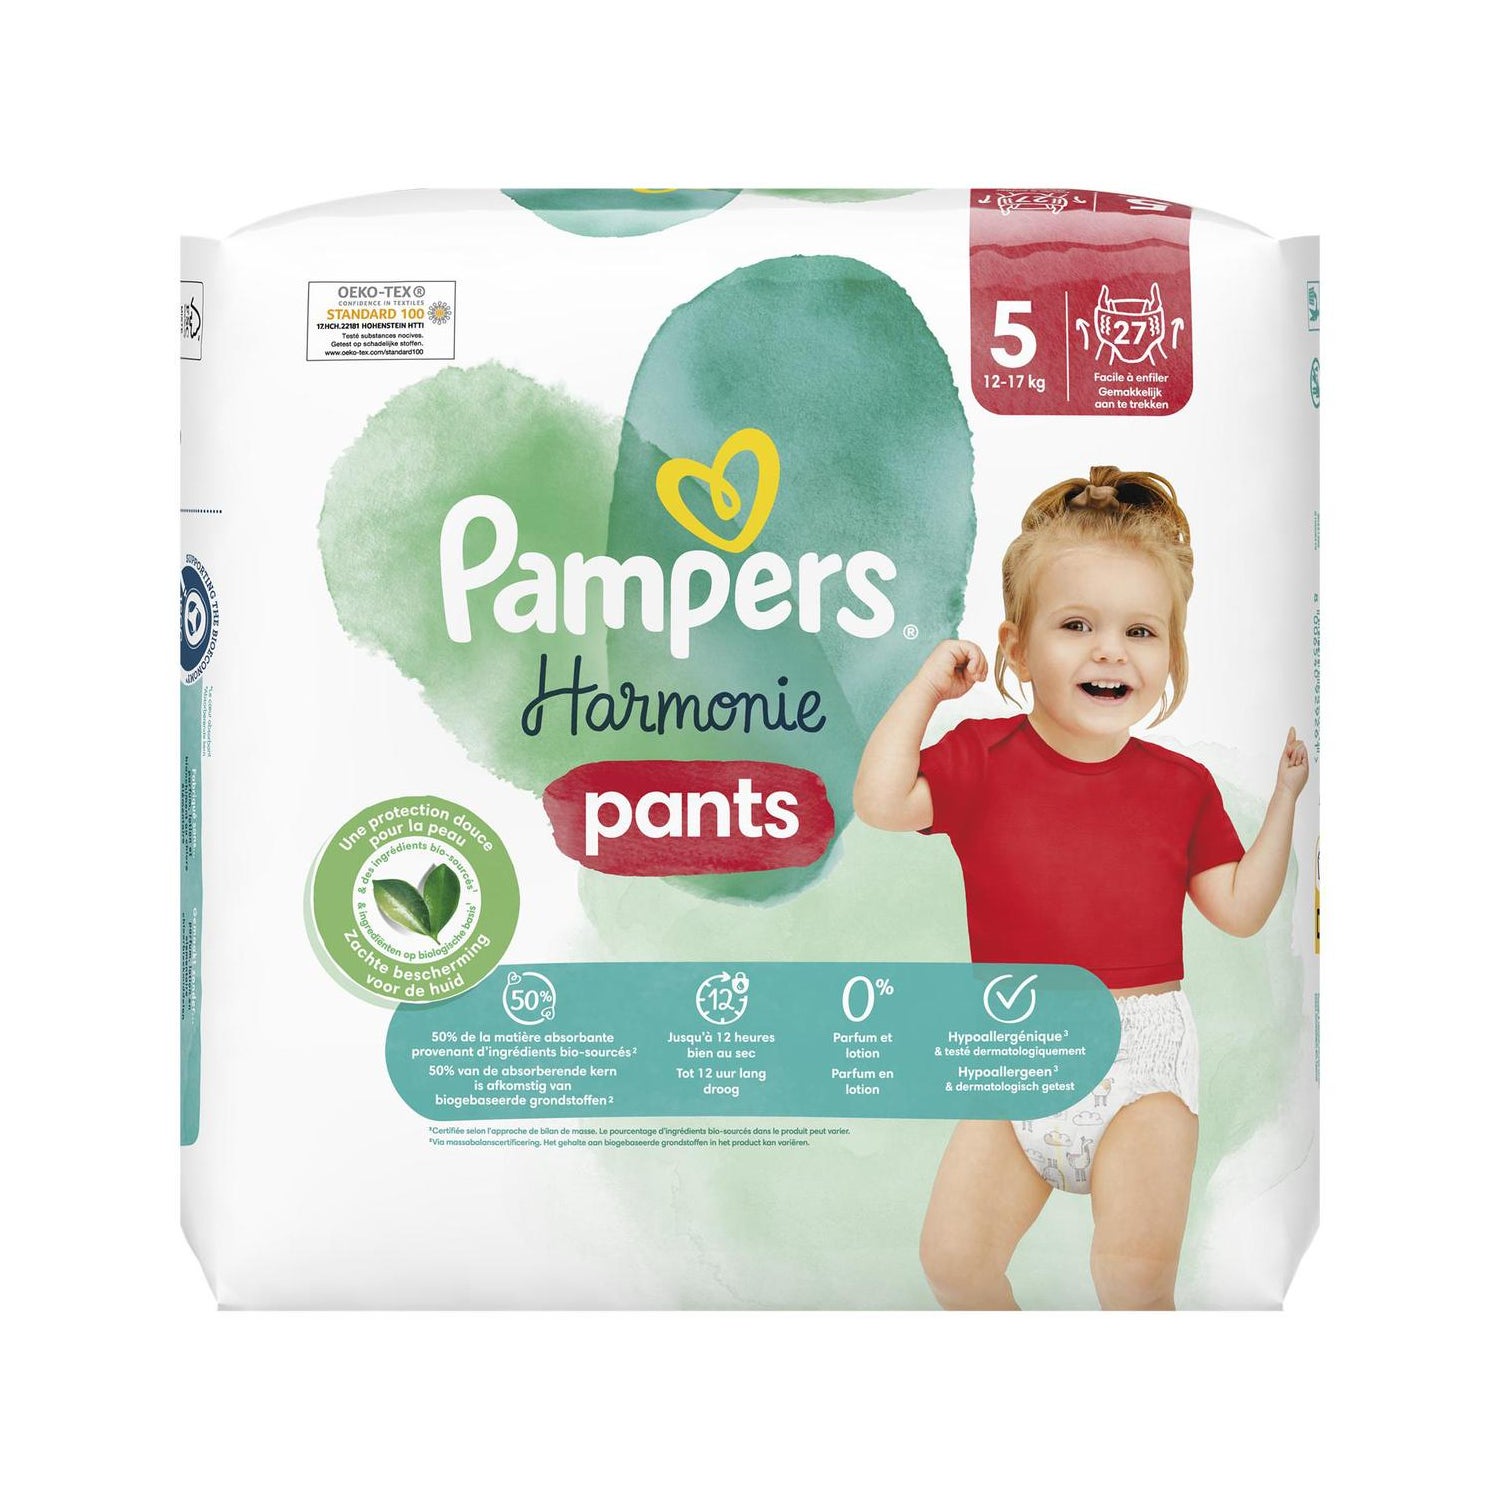 Pampers Harmonie t2 4 à 8 kg 39 couches